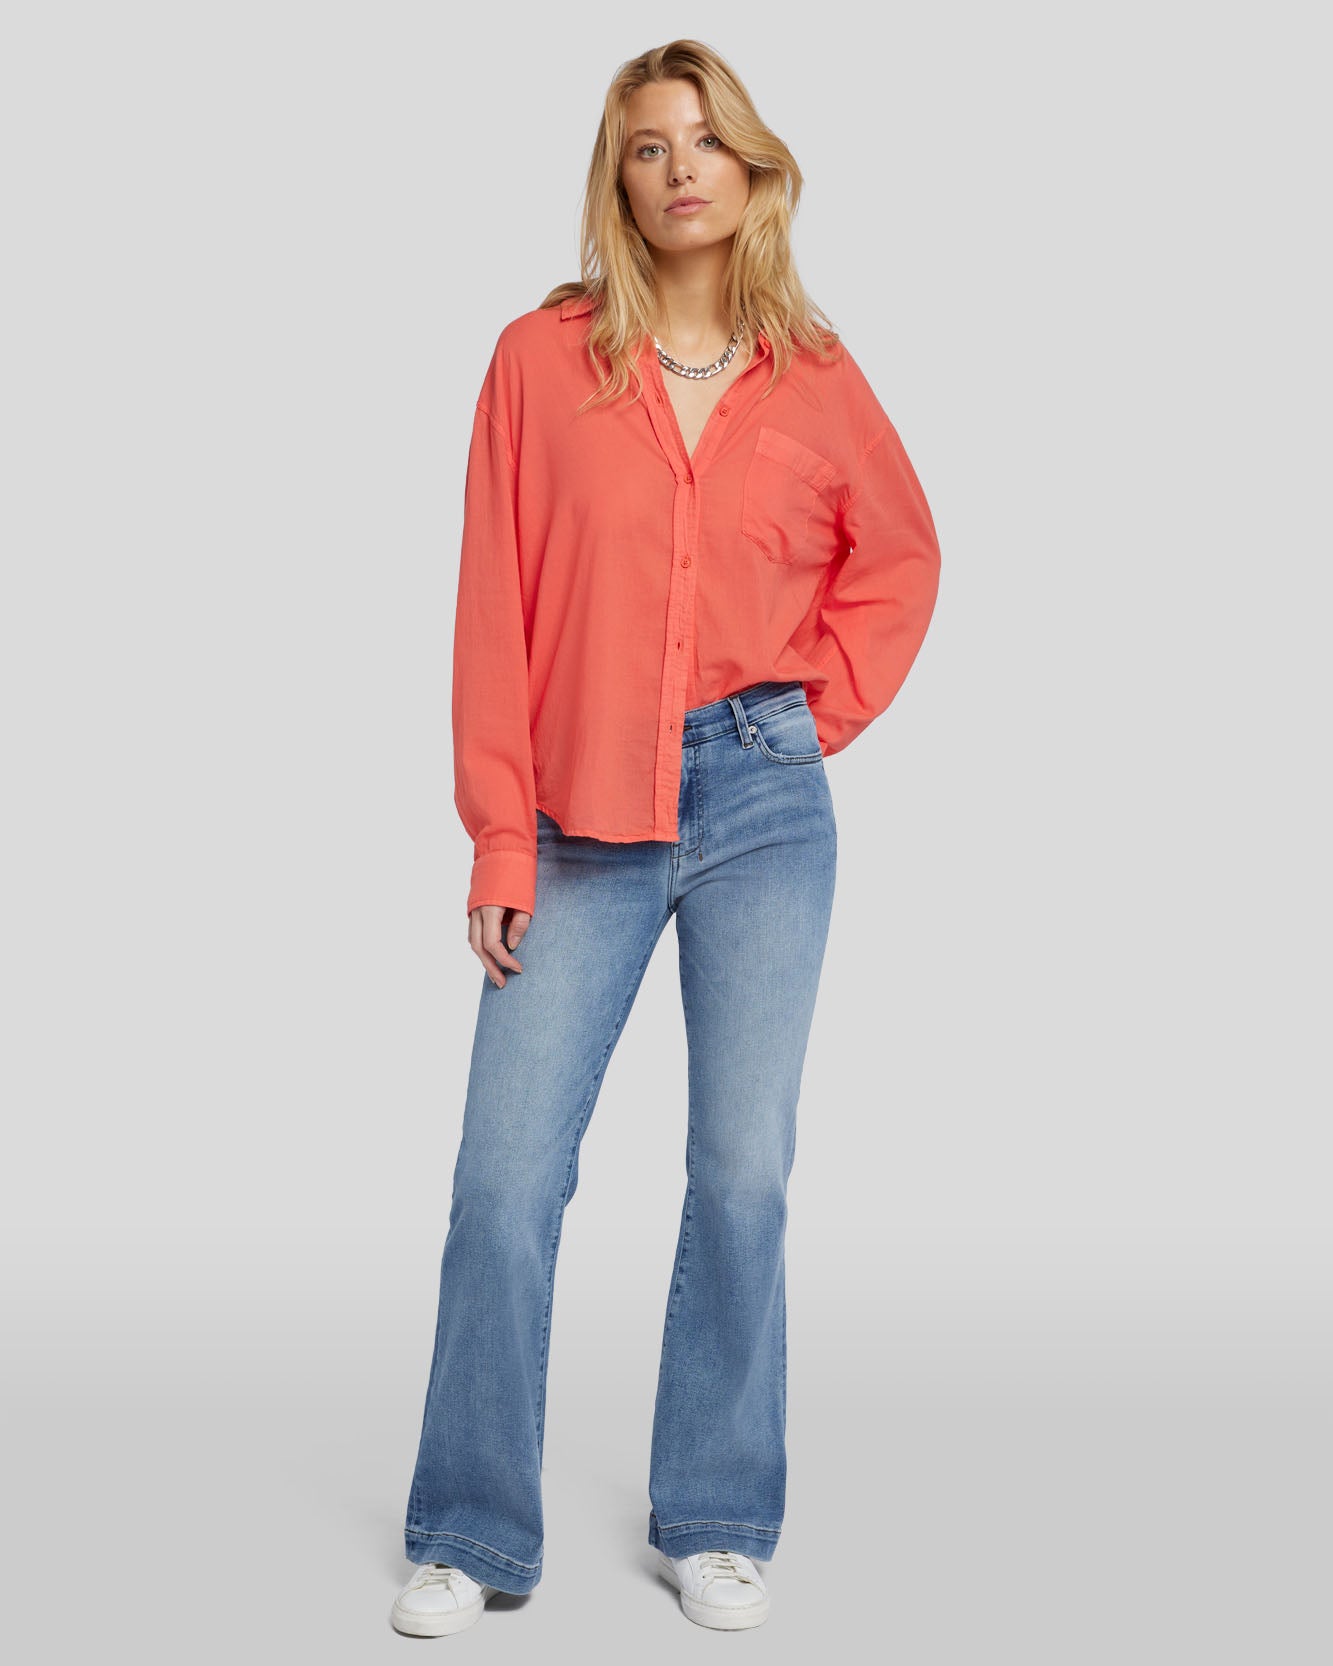 7 For All Mankind Seven For All Mankind Red Low Rise Slim Jeans, $190, STYLEBOP.com